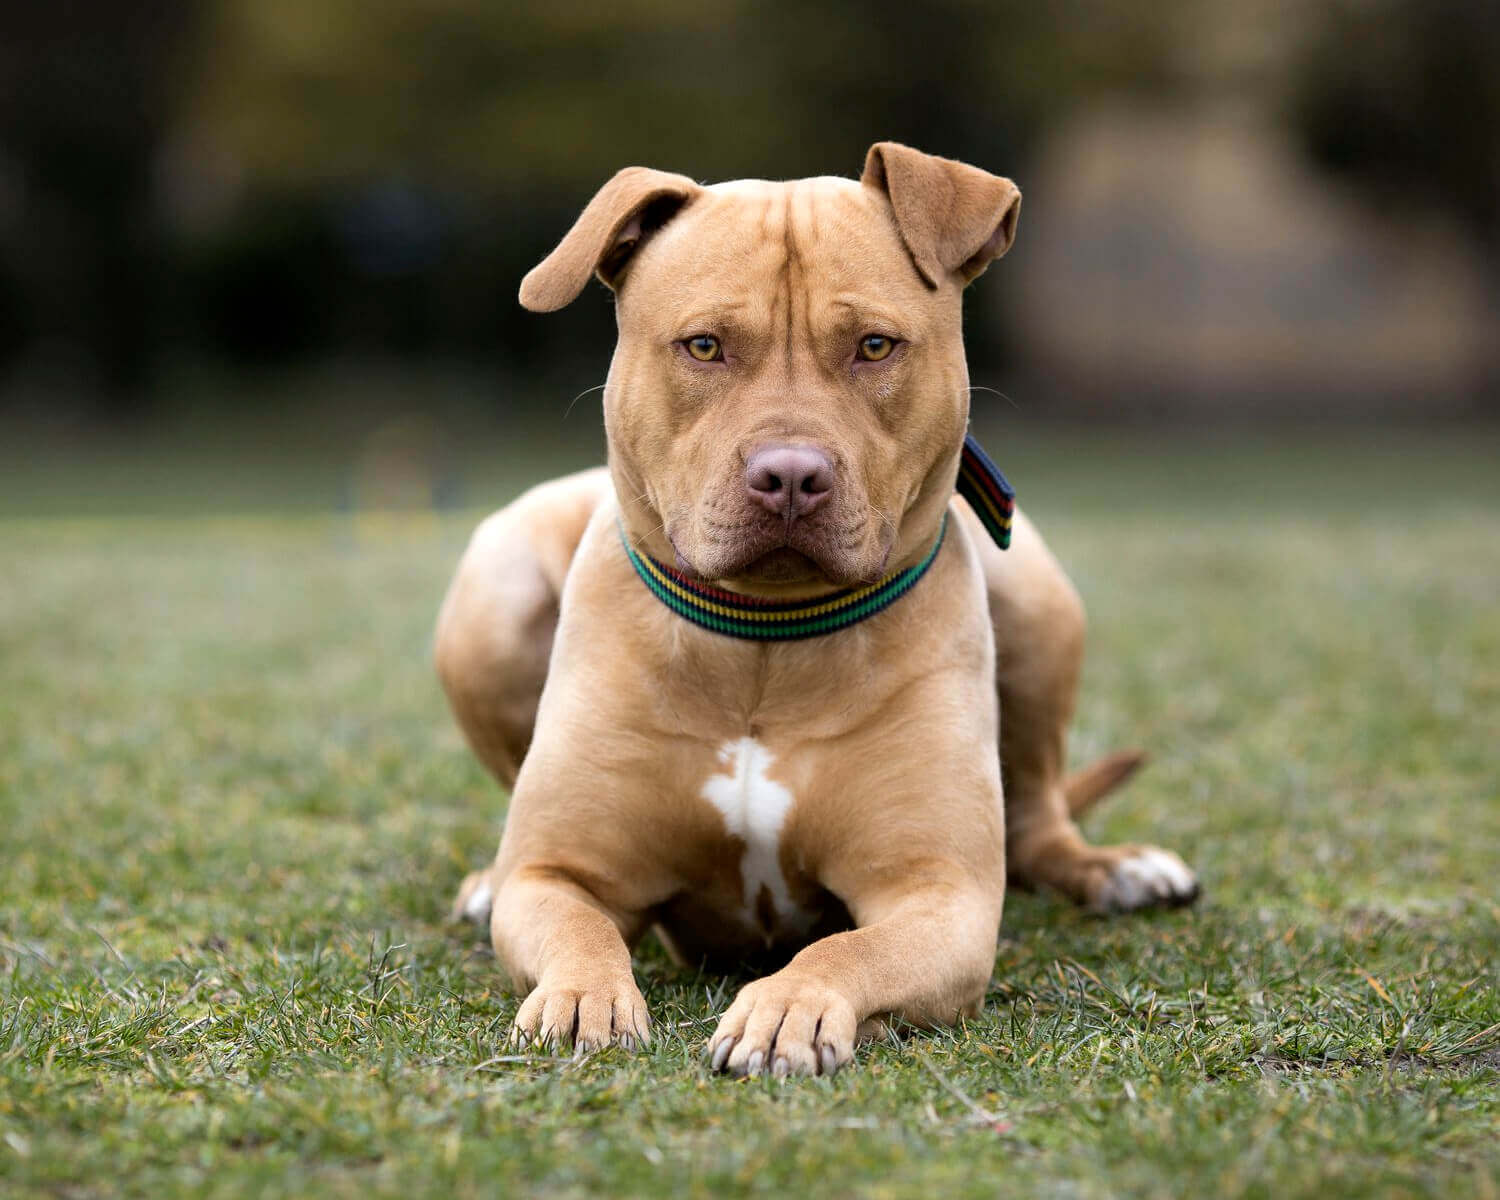 15 Amazing Facts About Staffordshire Bull Terriers You ...